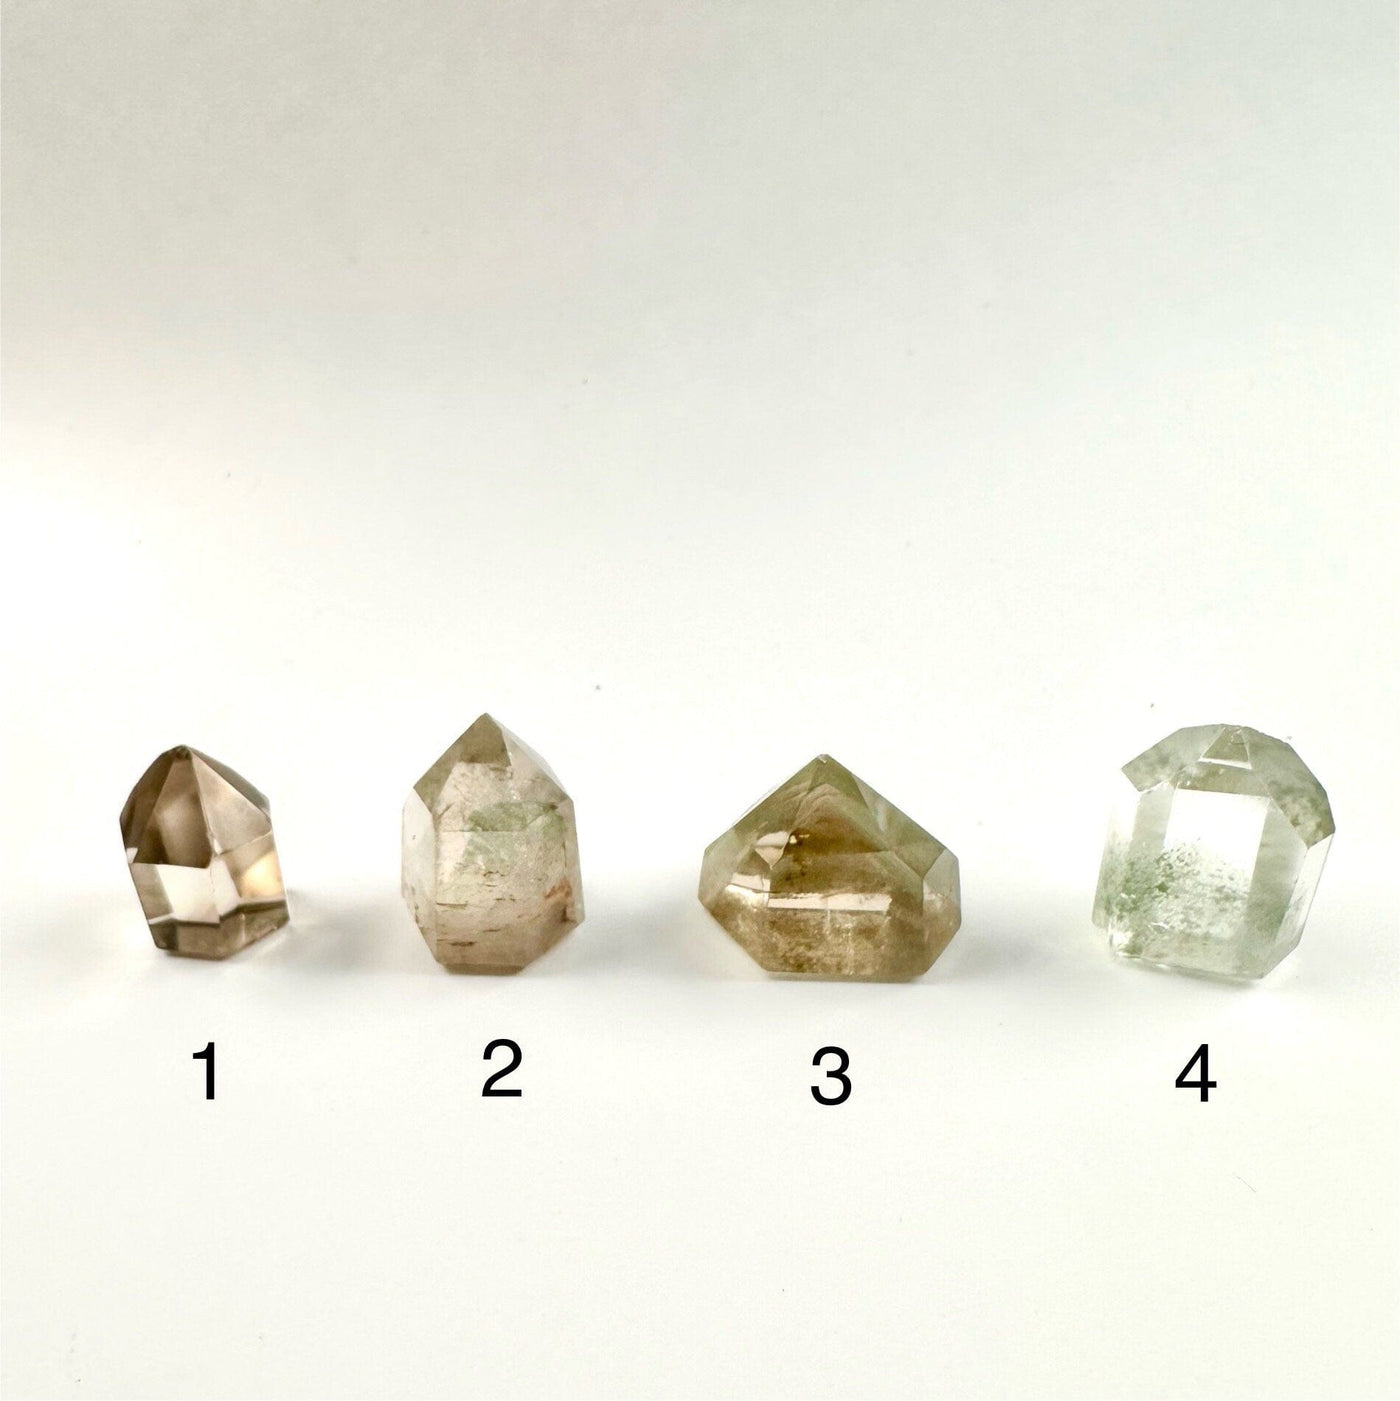 Crystal Quartz Points with Inclusions - Small Crystals - You Choose variants 1 2 3 4 labeled